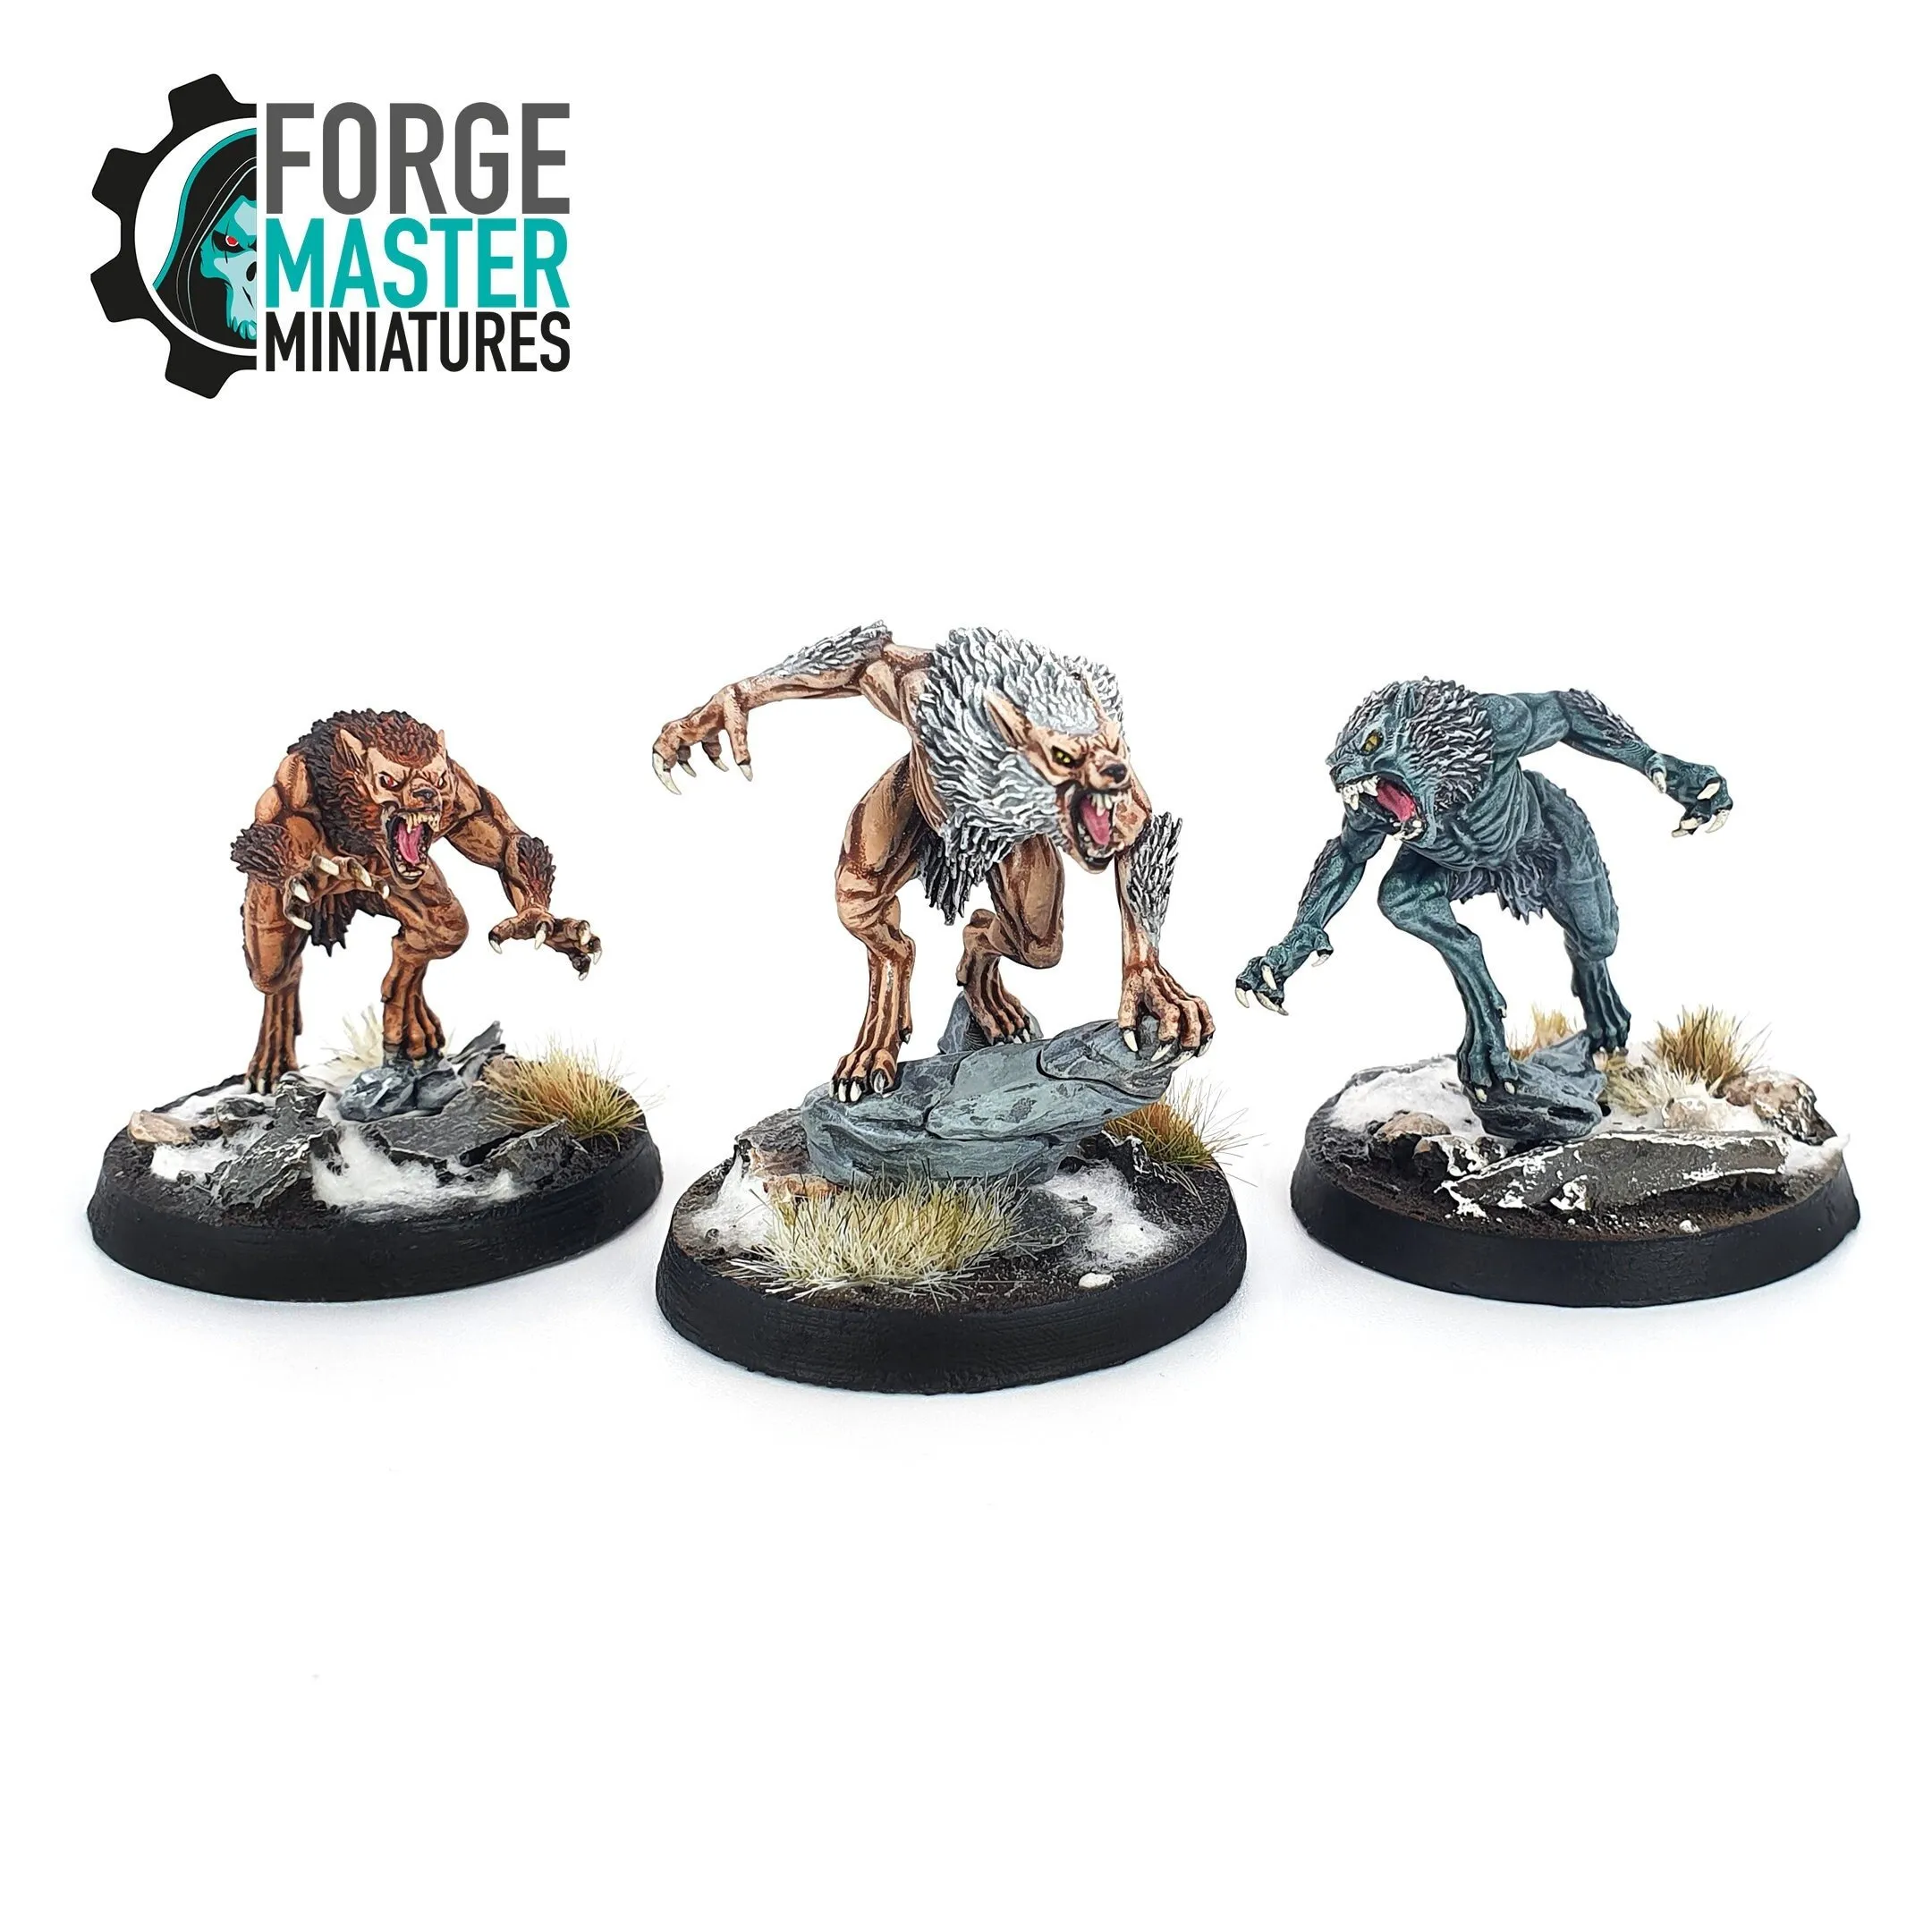 Undead Werewolves wargaming miniatures by Forgemaster Miniatures. 3D printed and painted.